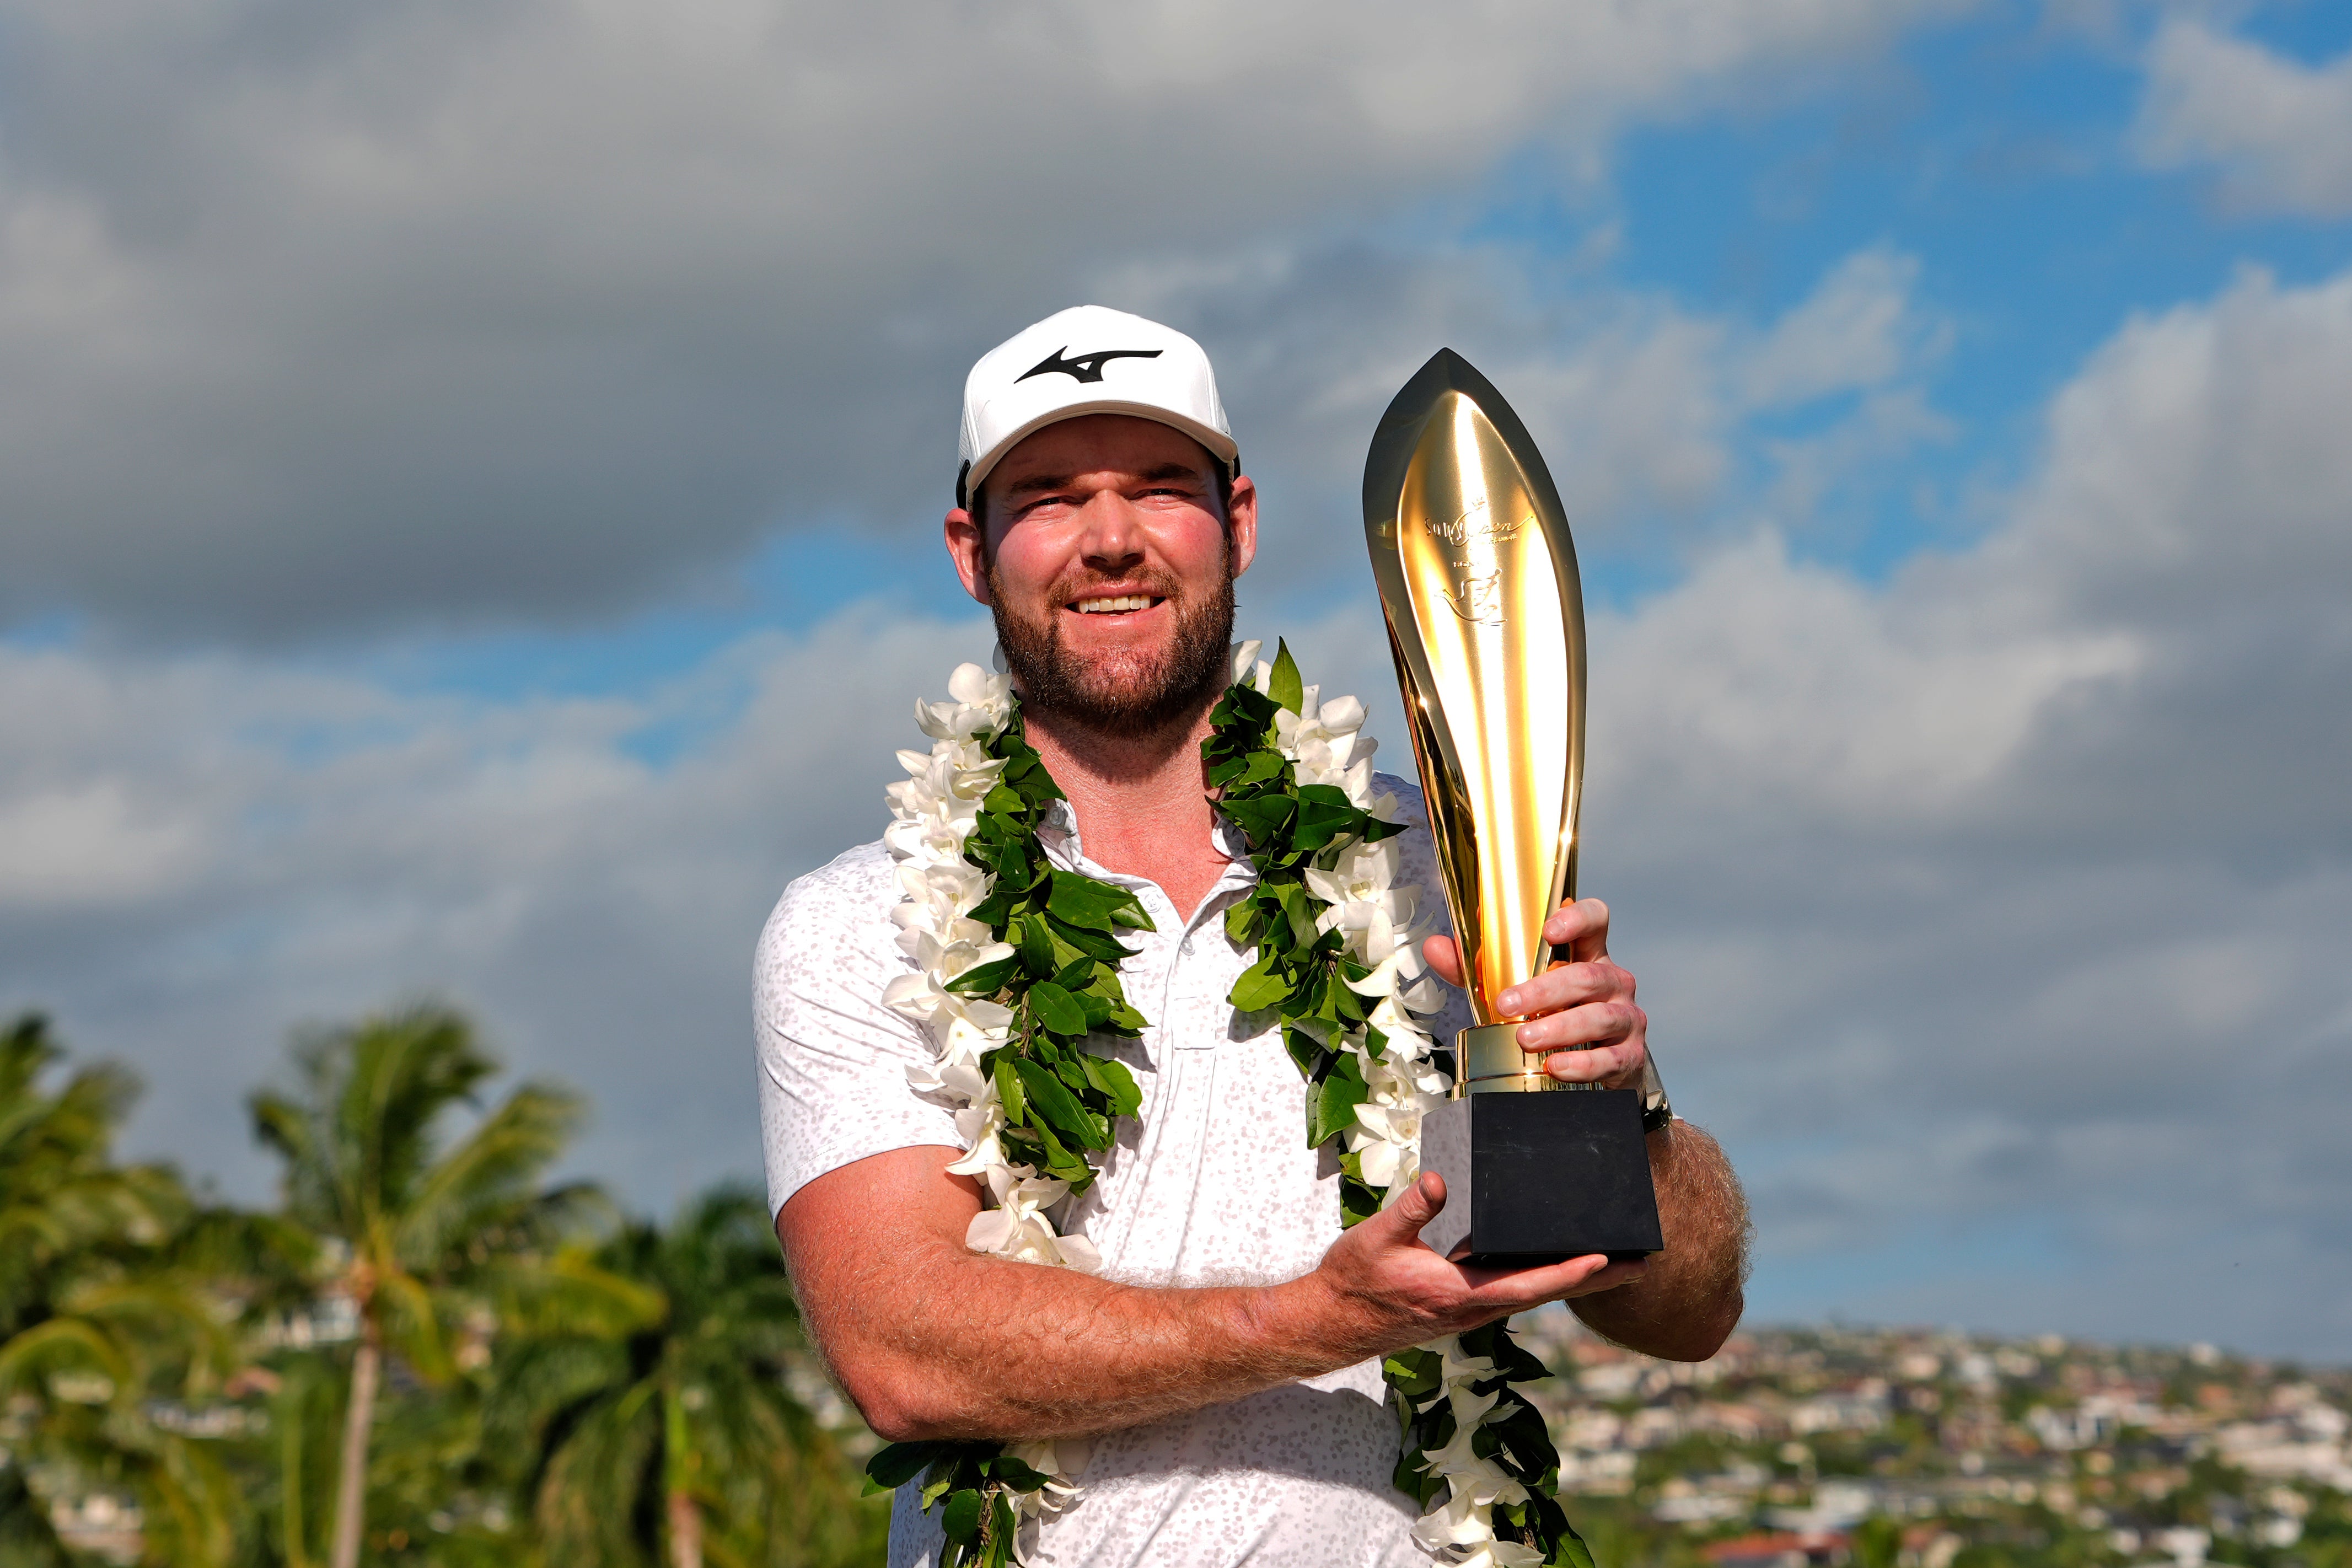 Grayson Murray holds the trophy after winning the Sony Open golf event, Sunday, Jan. 14, 2024, at Waialae Country Club in Honolulu. Two-time PGA Tour winner Grayson Murray died Saturday morning, May 25, 2024 at age 30, one day after he withdrew from the Charles Schwab Cup Challenge at Colonial(AP Photo/Matt York, File)